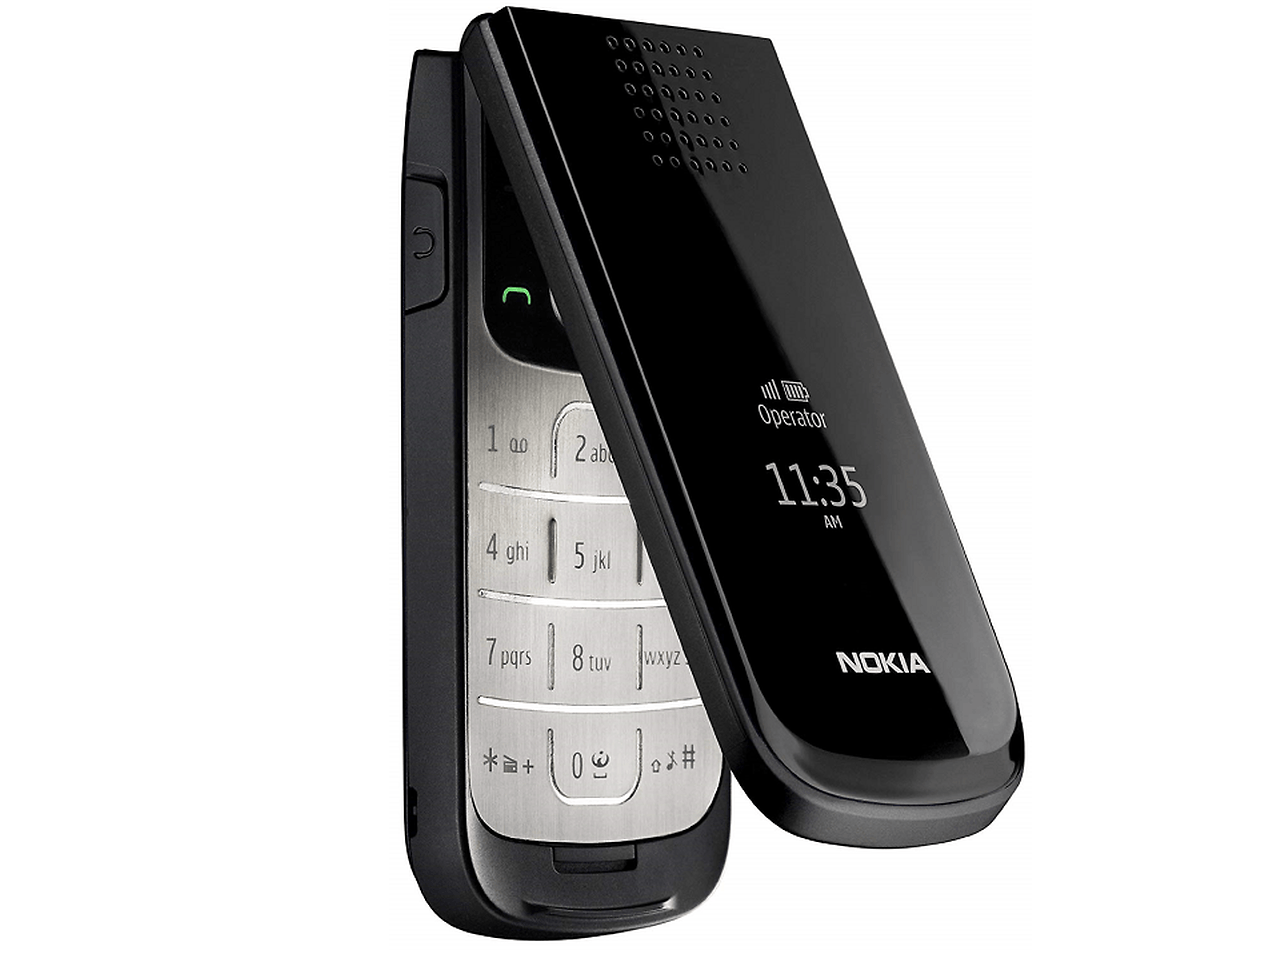 Choose the Nokia 2720 Flip concept you like more (Poll)